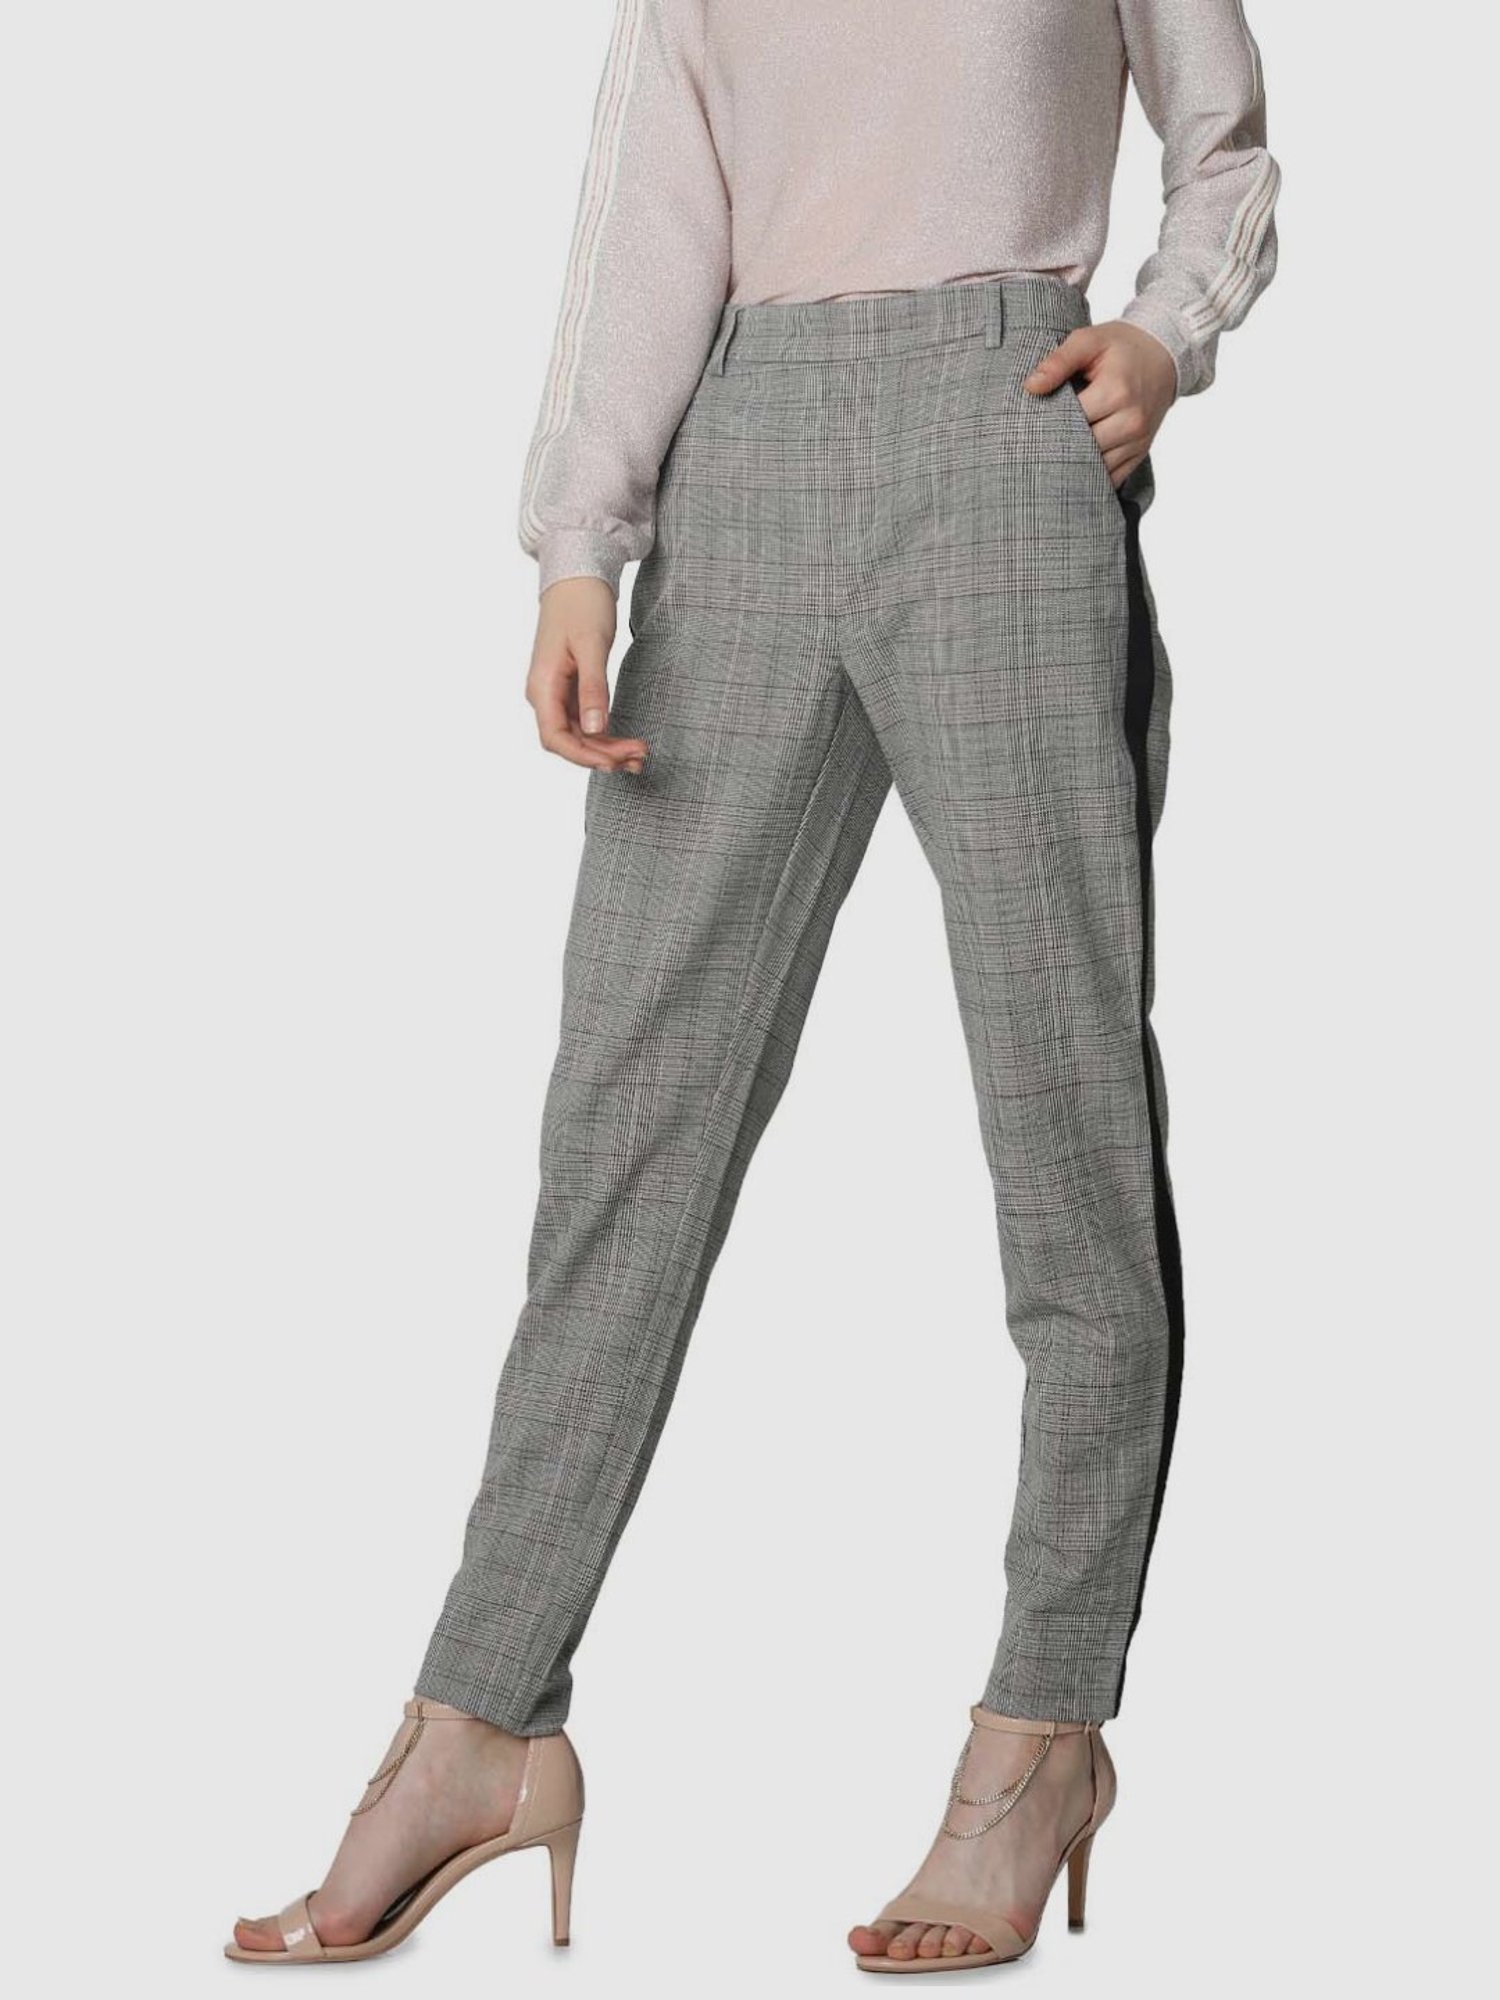 Buy Lipsy Black Grey Check Petite Smart Bootleg Elastic Back Trousers from  Next India